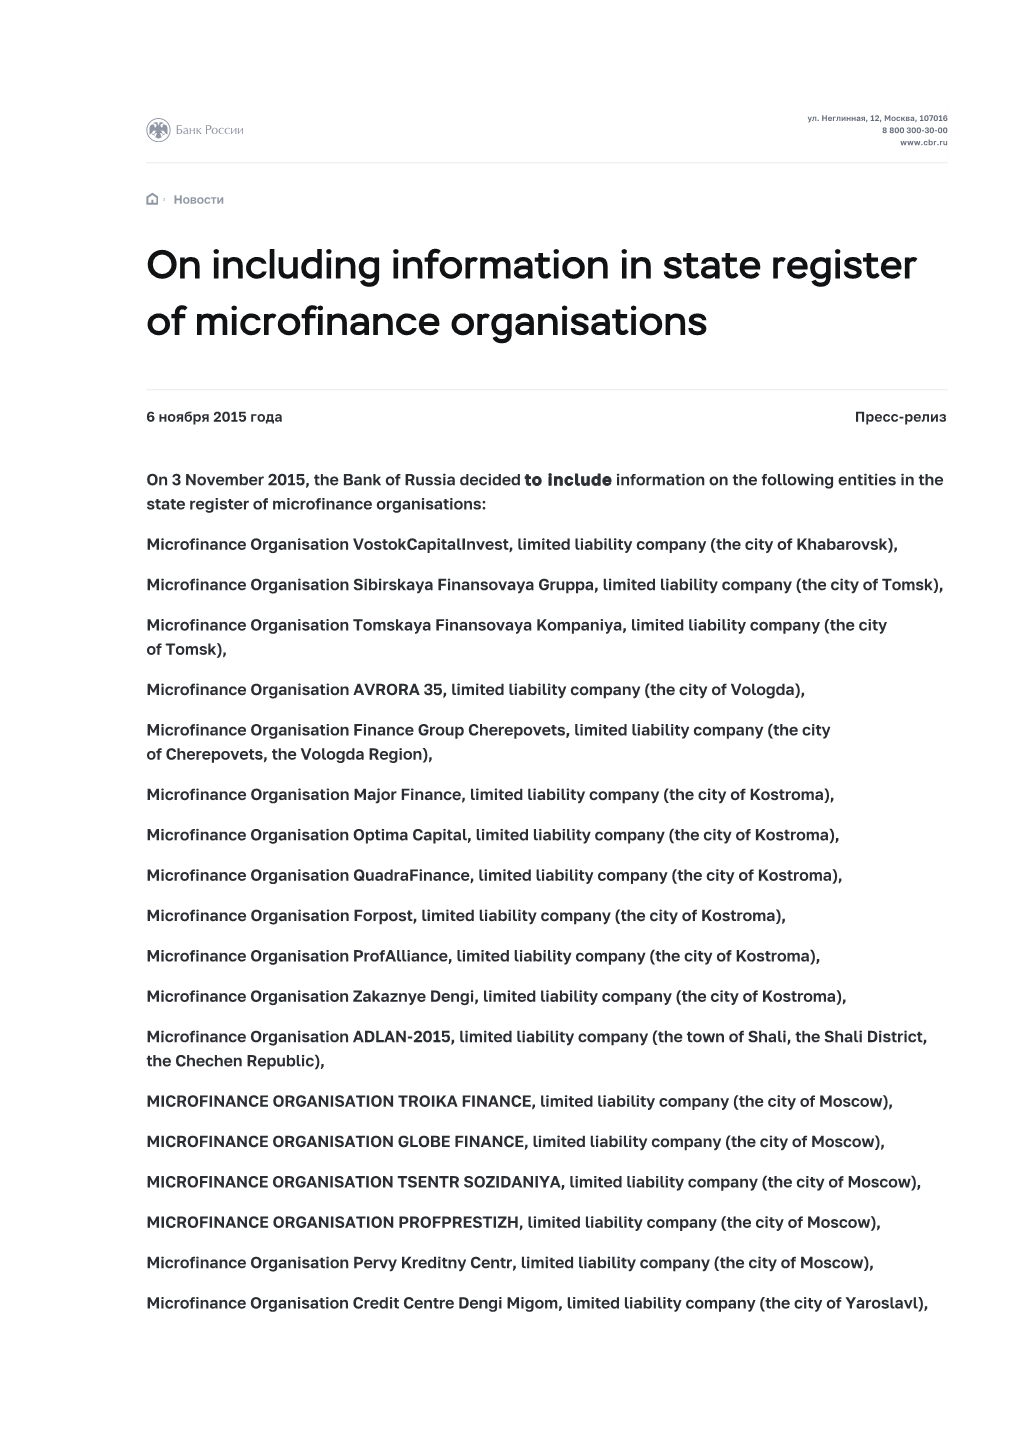 On Including Information in State Register of Microfinance Organisations